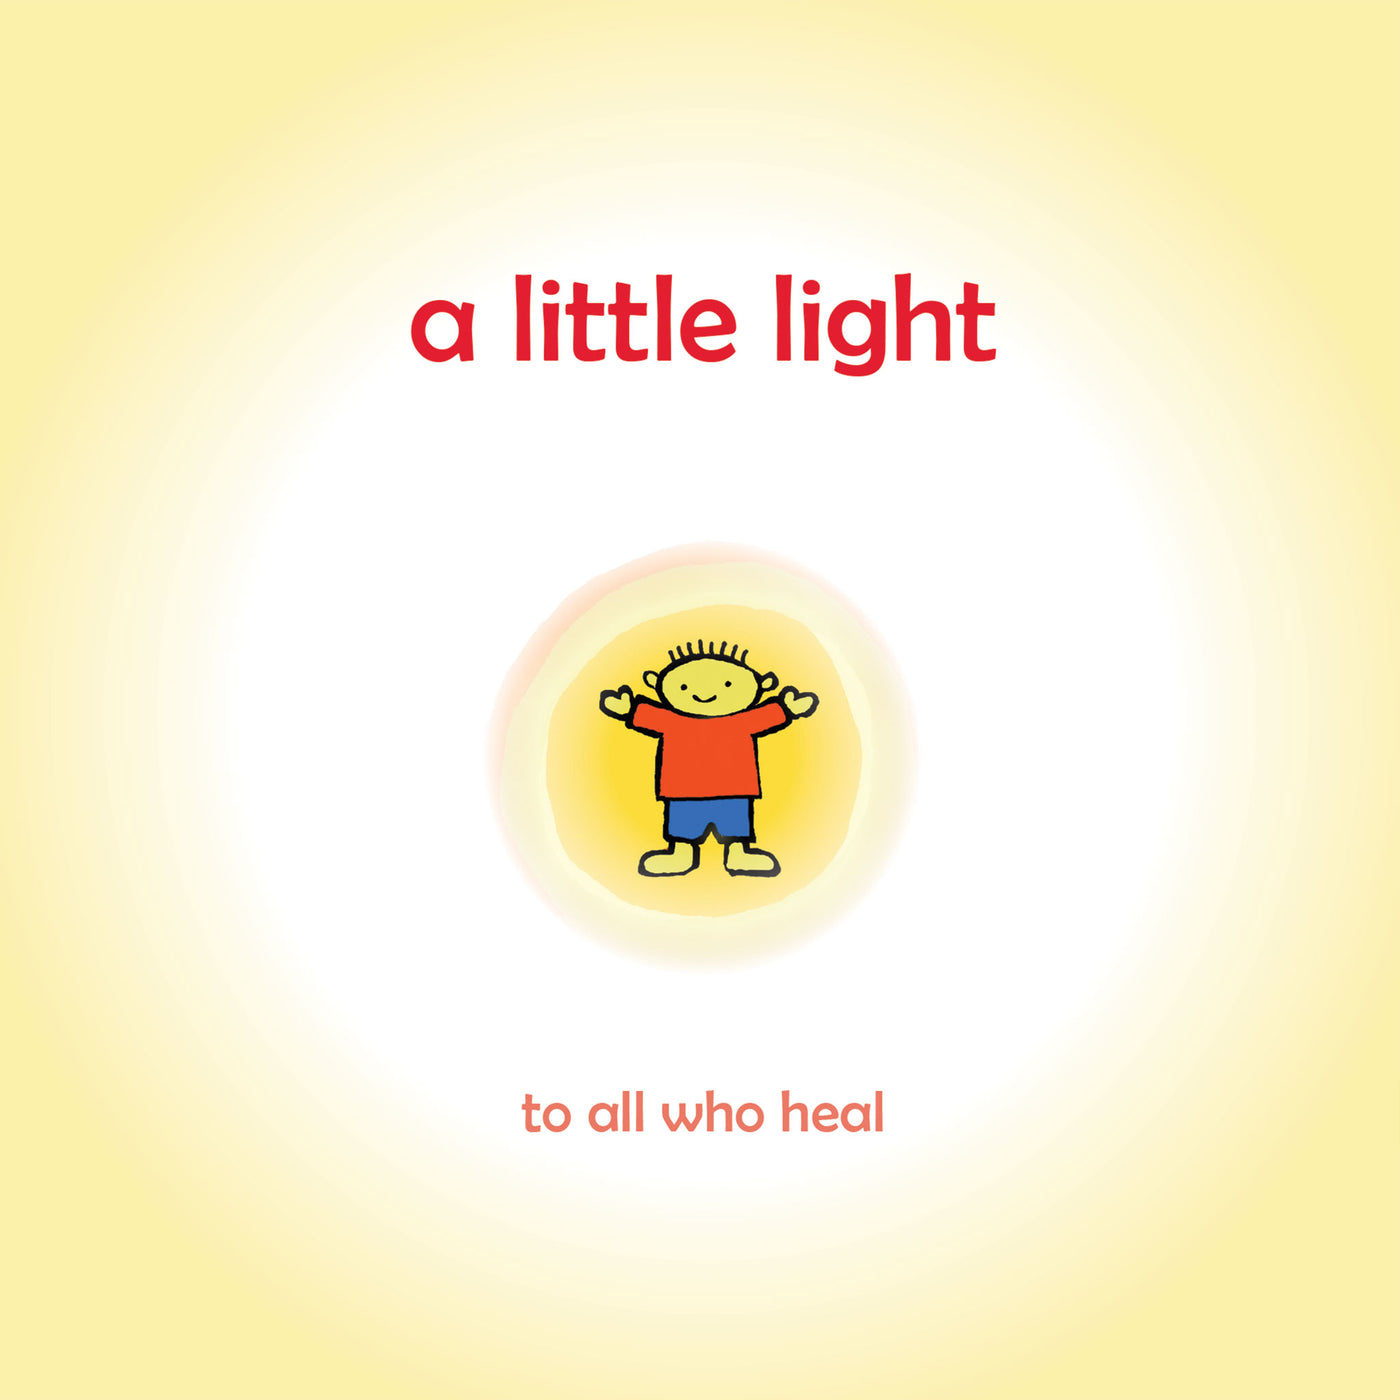 A Little Light: Connecting children with their inner light so they can shine